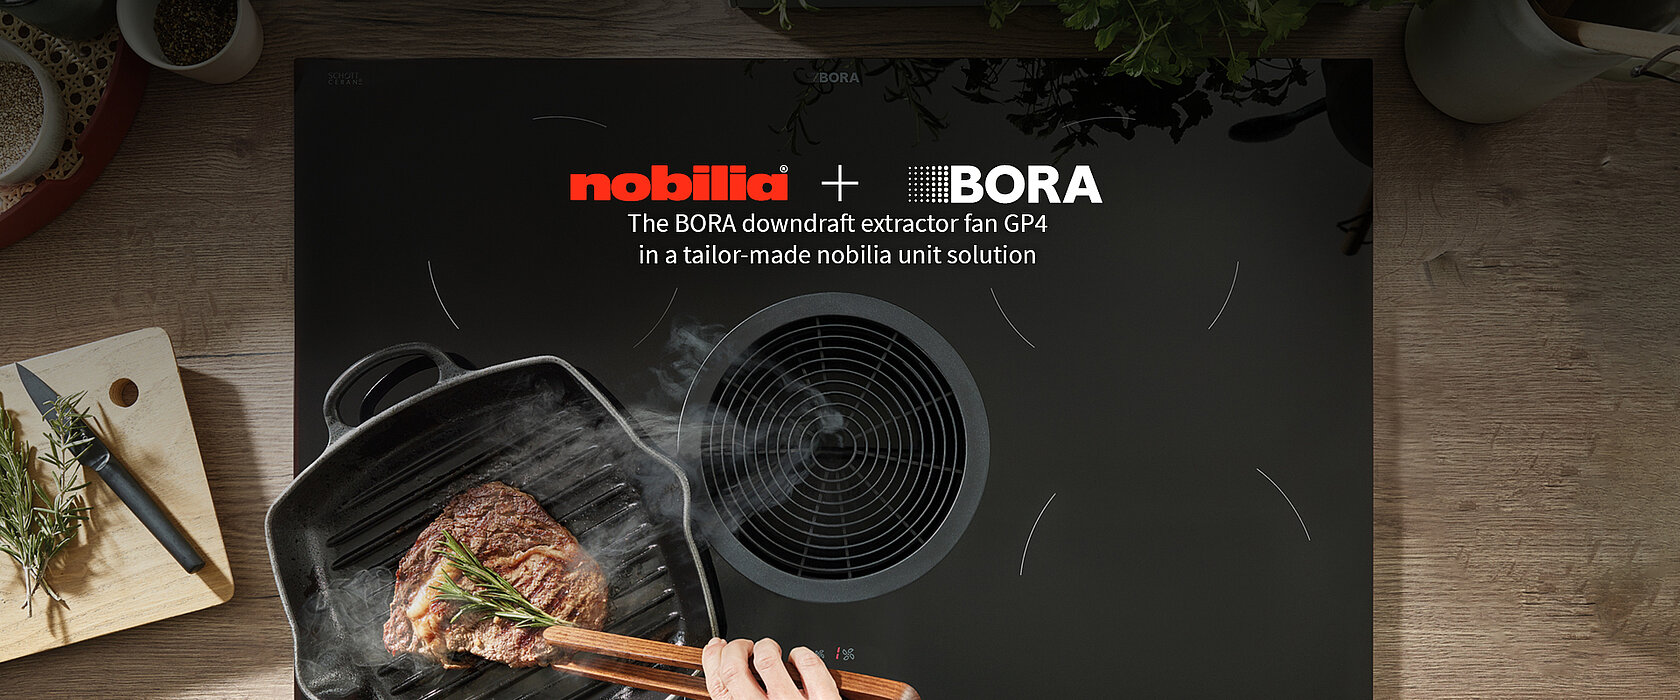 The BORA downdraft extractor fan GP4  in a tailor-made nobilia unit solution